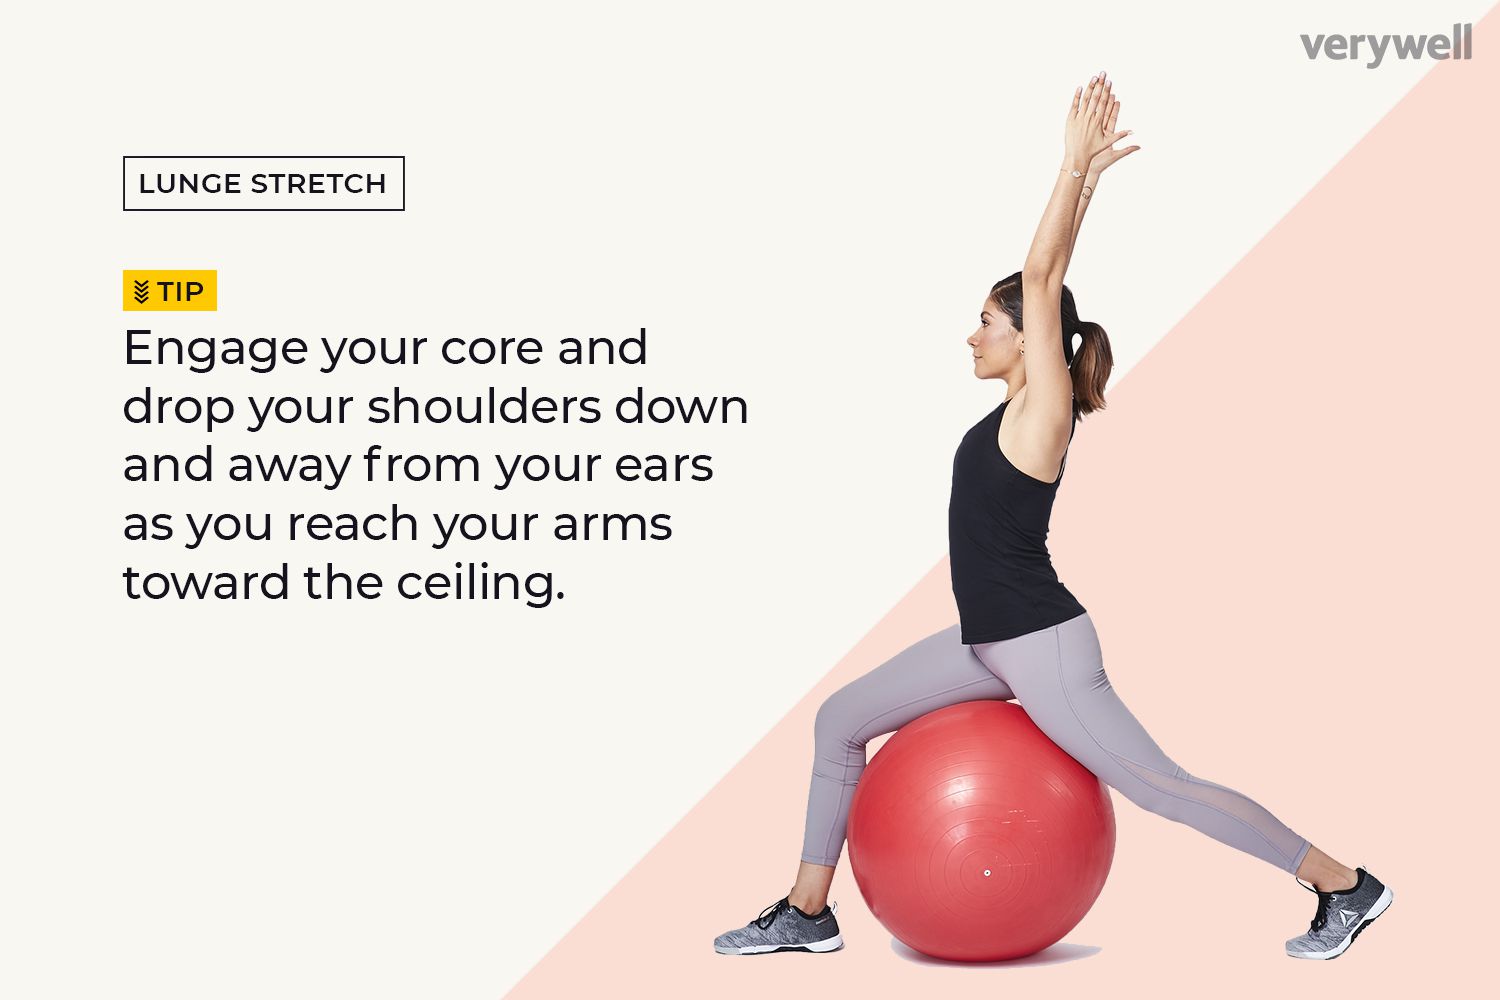 ashwani vashisht recommends ball stretching before and after pic